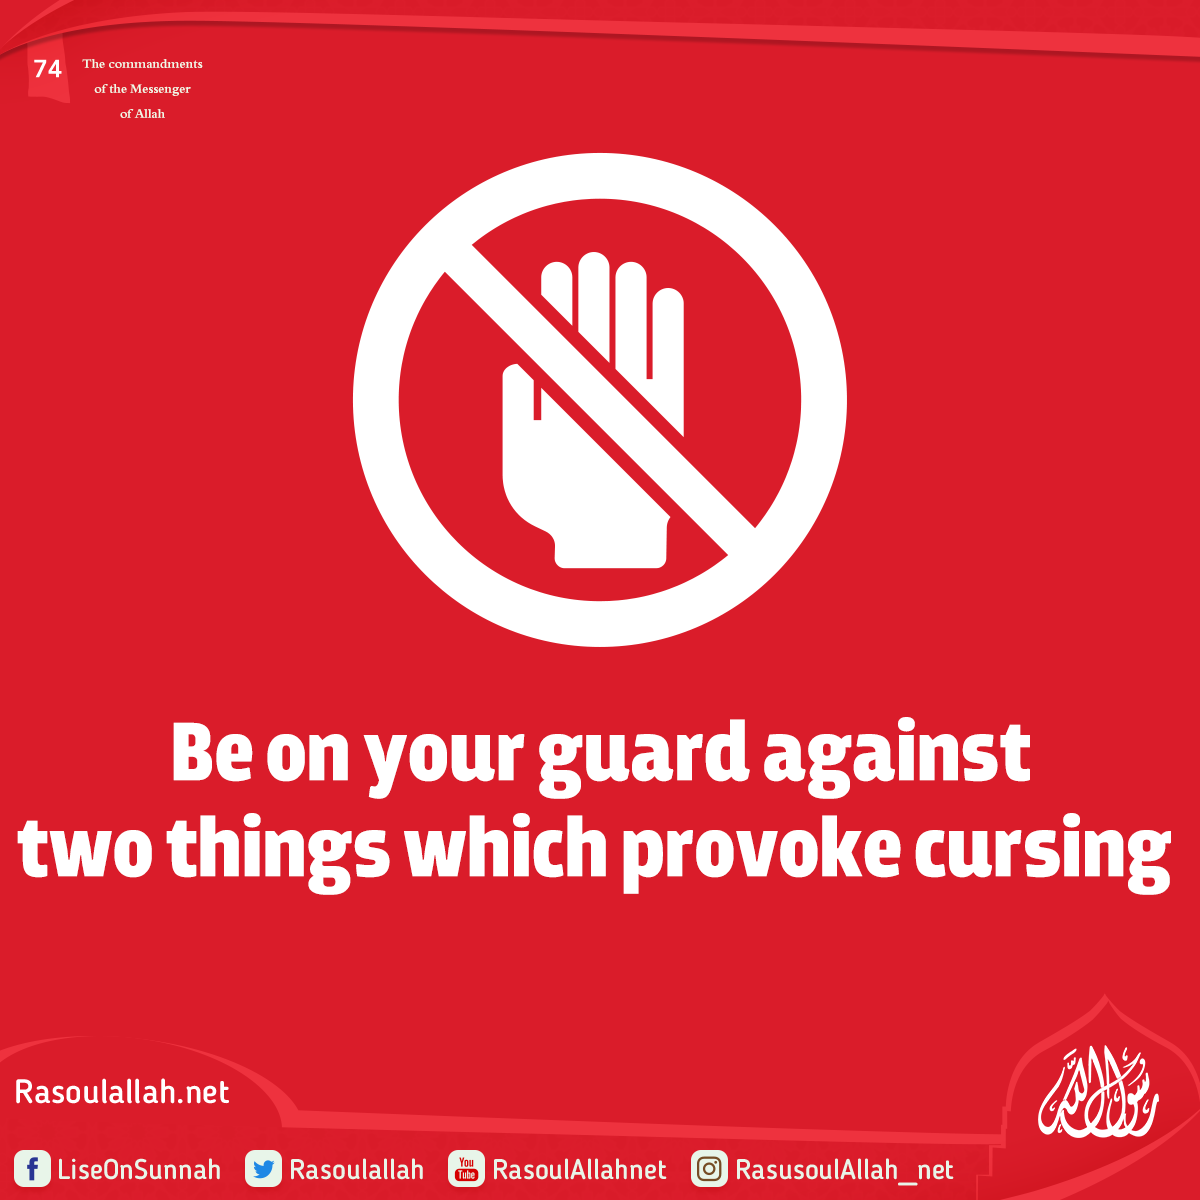 Be on your guard against two things which provoke cursing